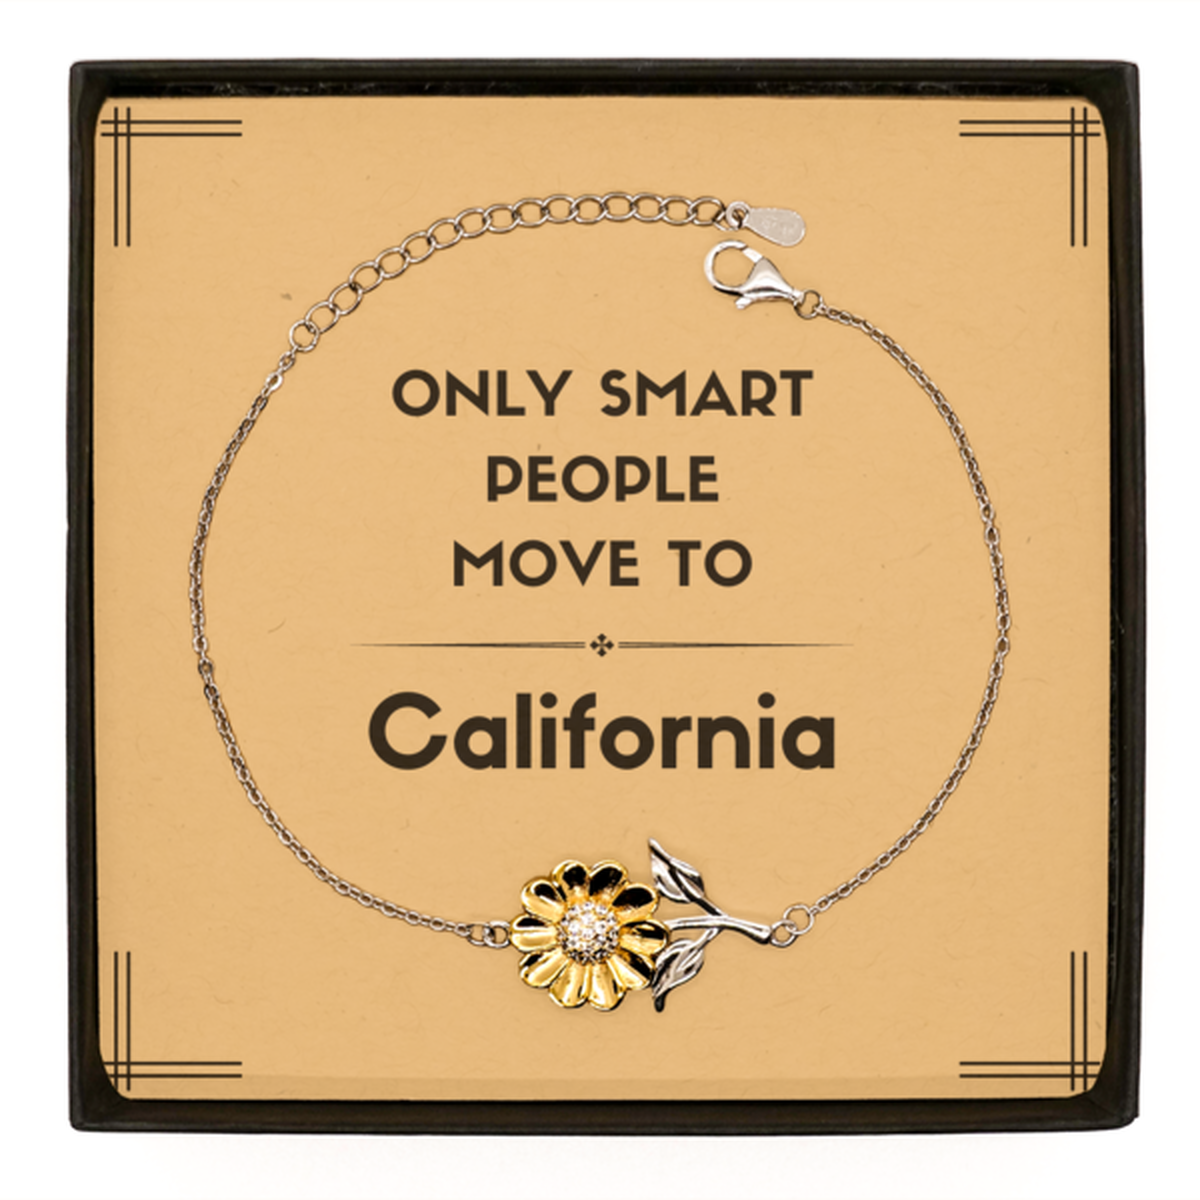 Only smart people move to California Sunflower Bracelet, Message Card Gifts For California, Move to California Gifts for Friends Coworker Funny Saying Quote